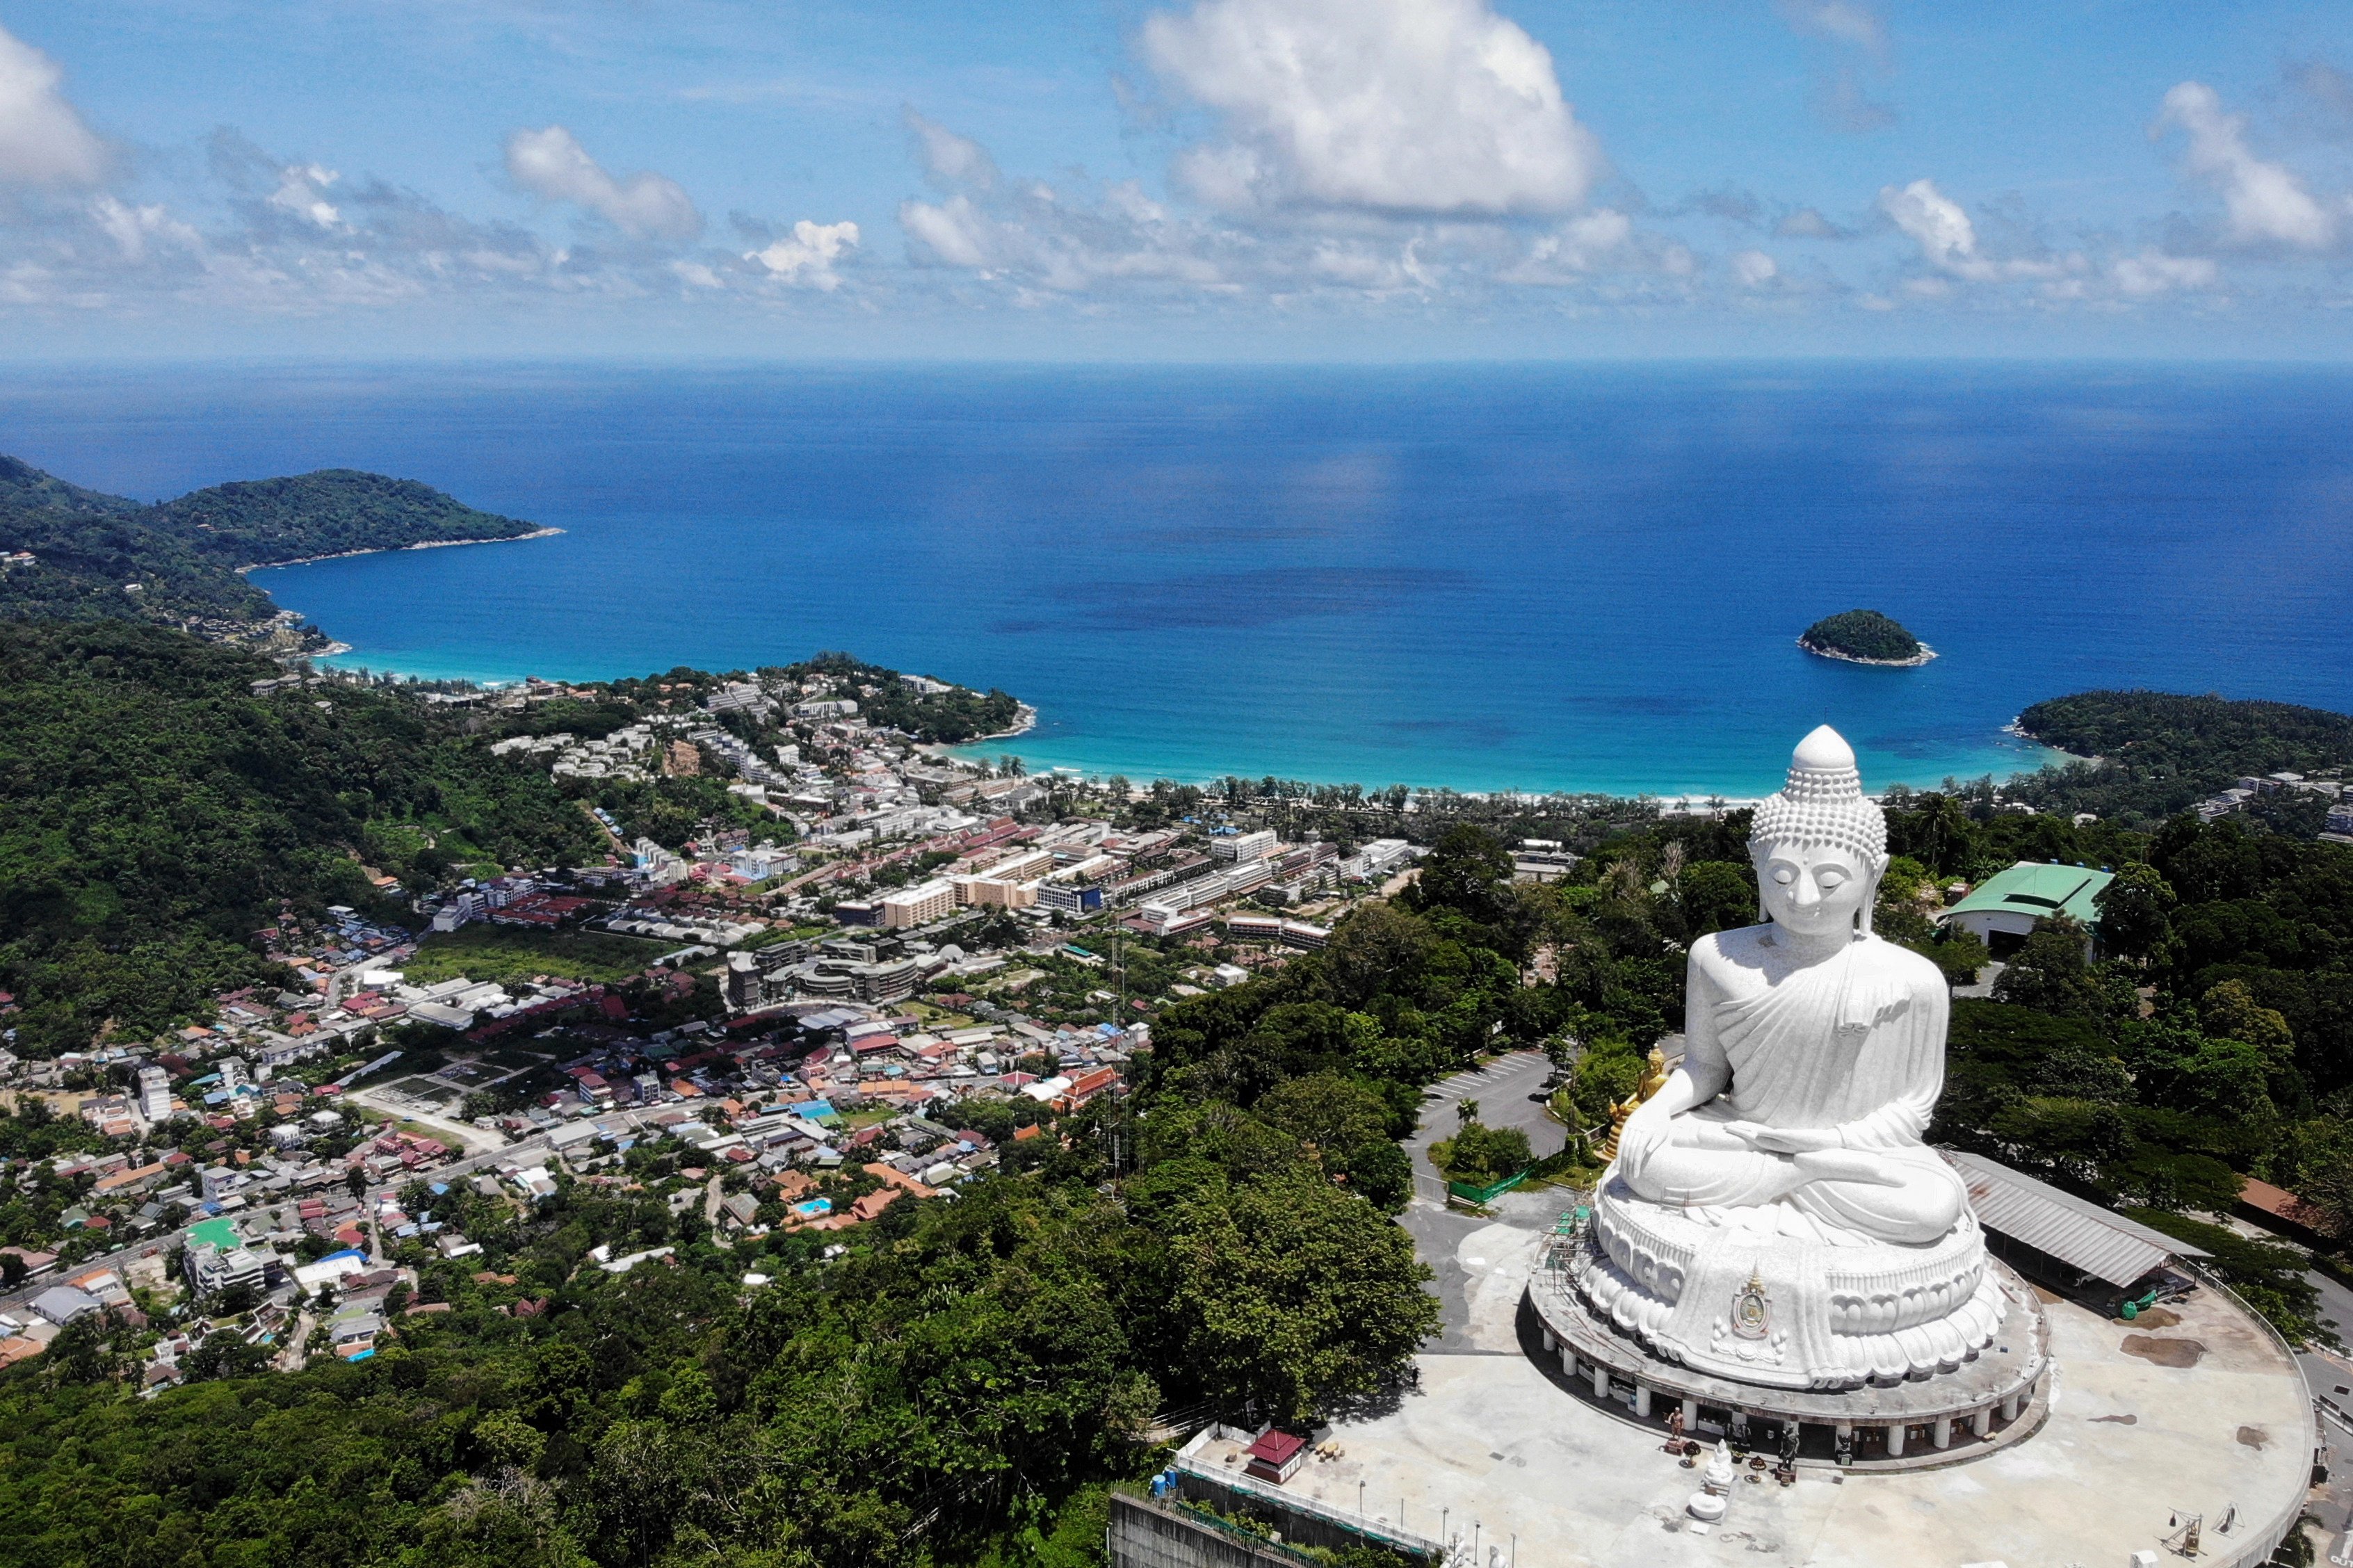 Phuket’s Big Buddha with Kata Beach behind it. The Phuket Sandbox tourism scheme that allows visits by people vaccinated against Covid-19 launched in July. Photo: AFP